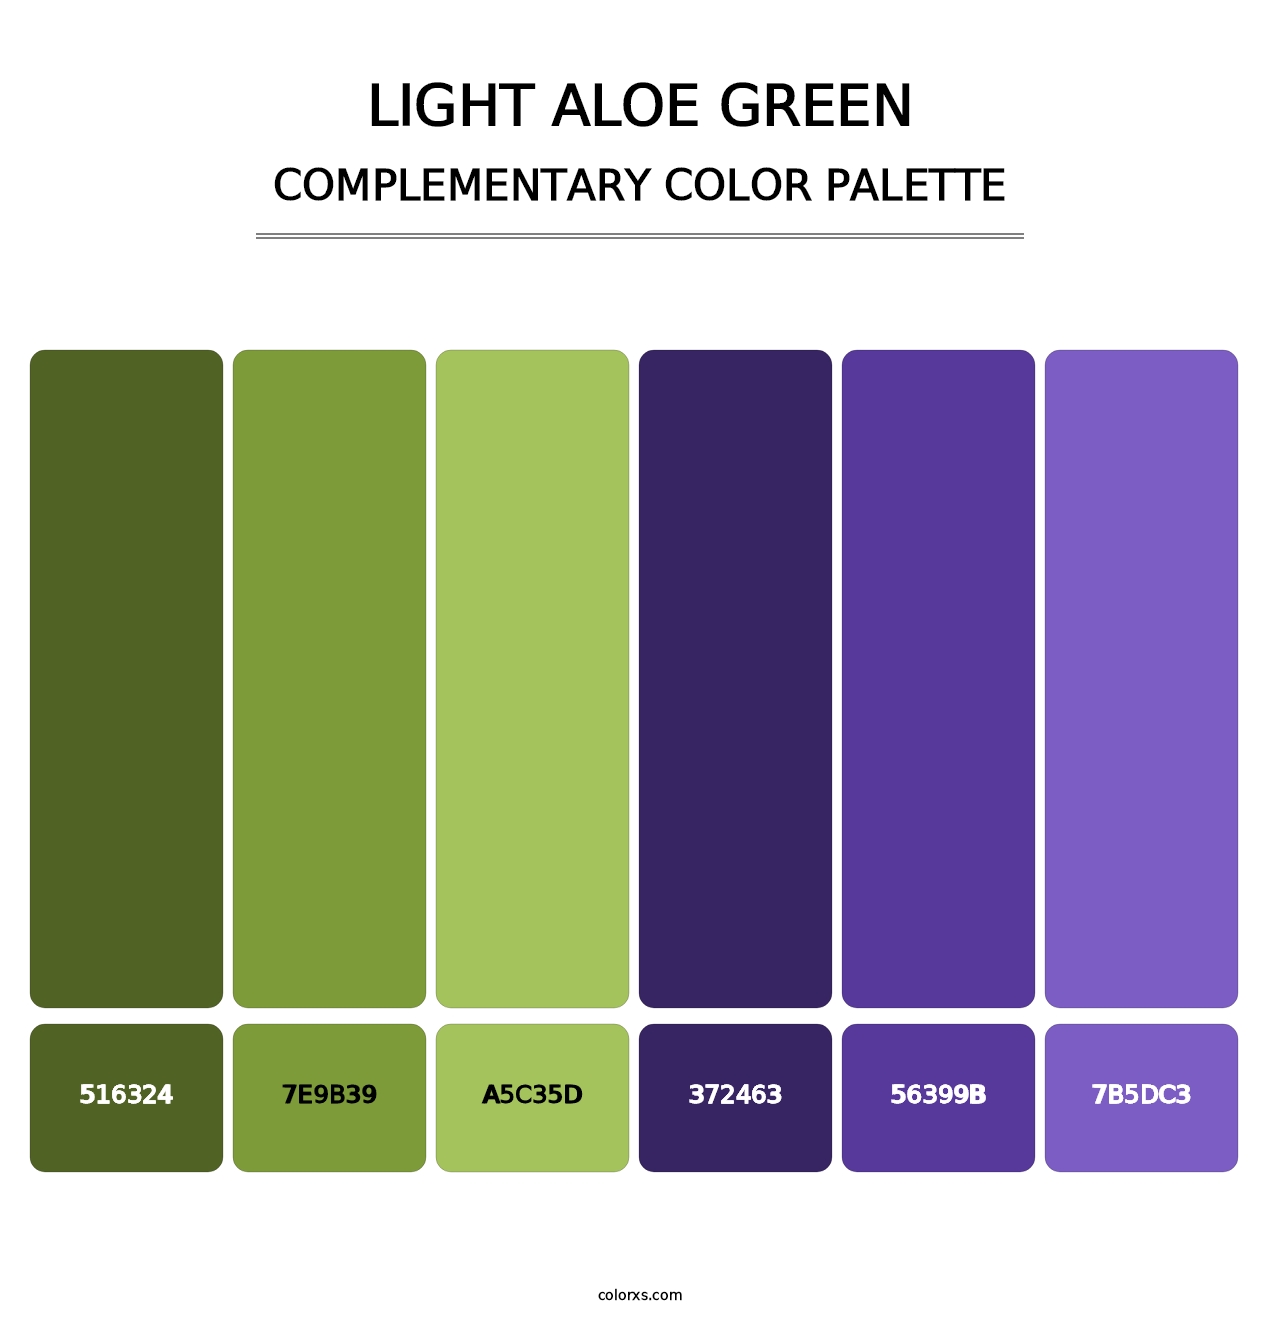 Light Aloe Green - Complementary Color Palette